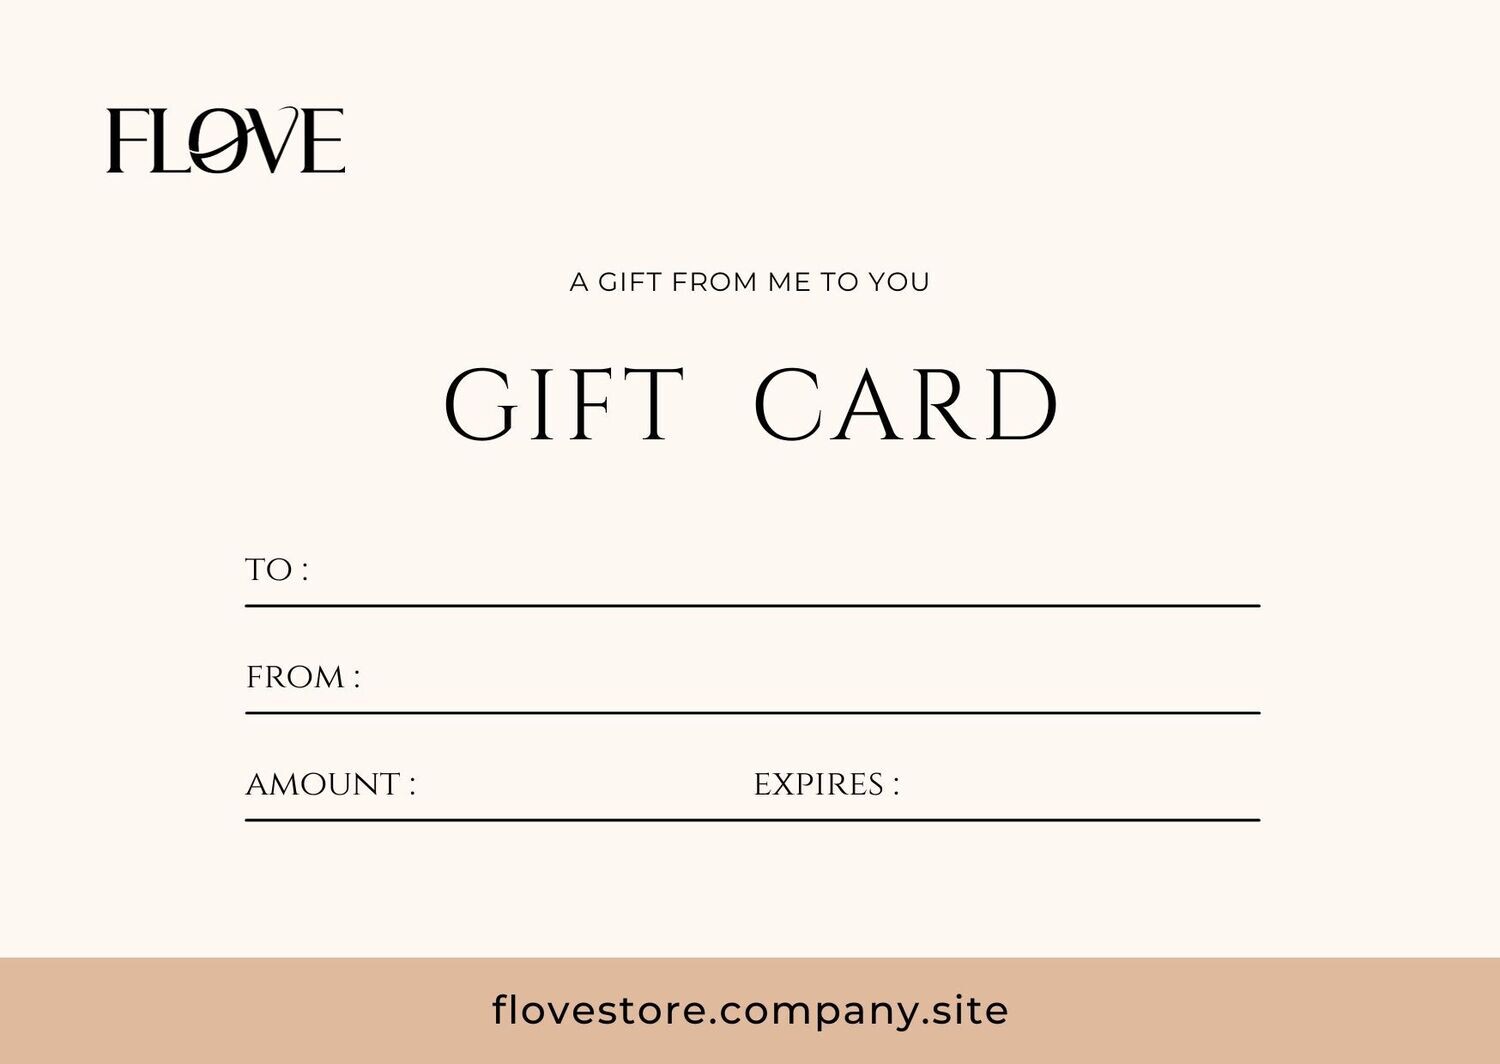 Gift card (Soft copy)